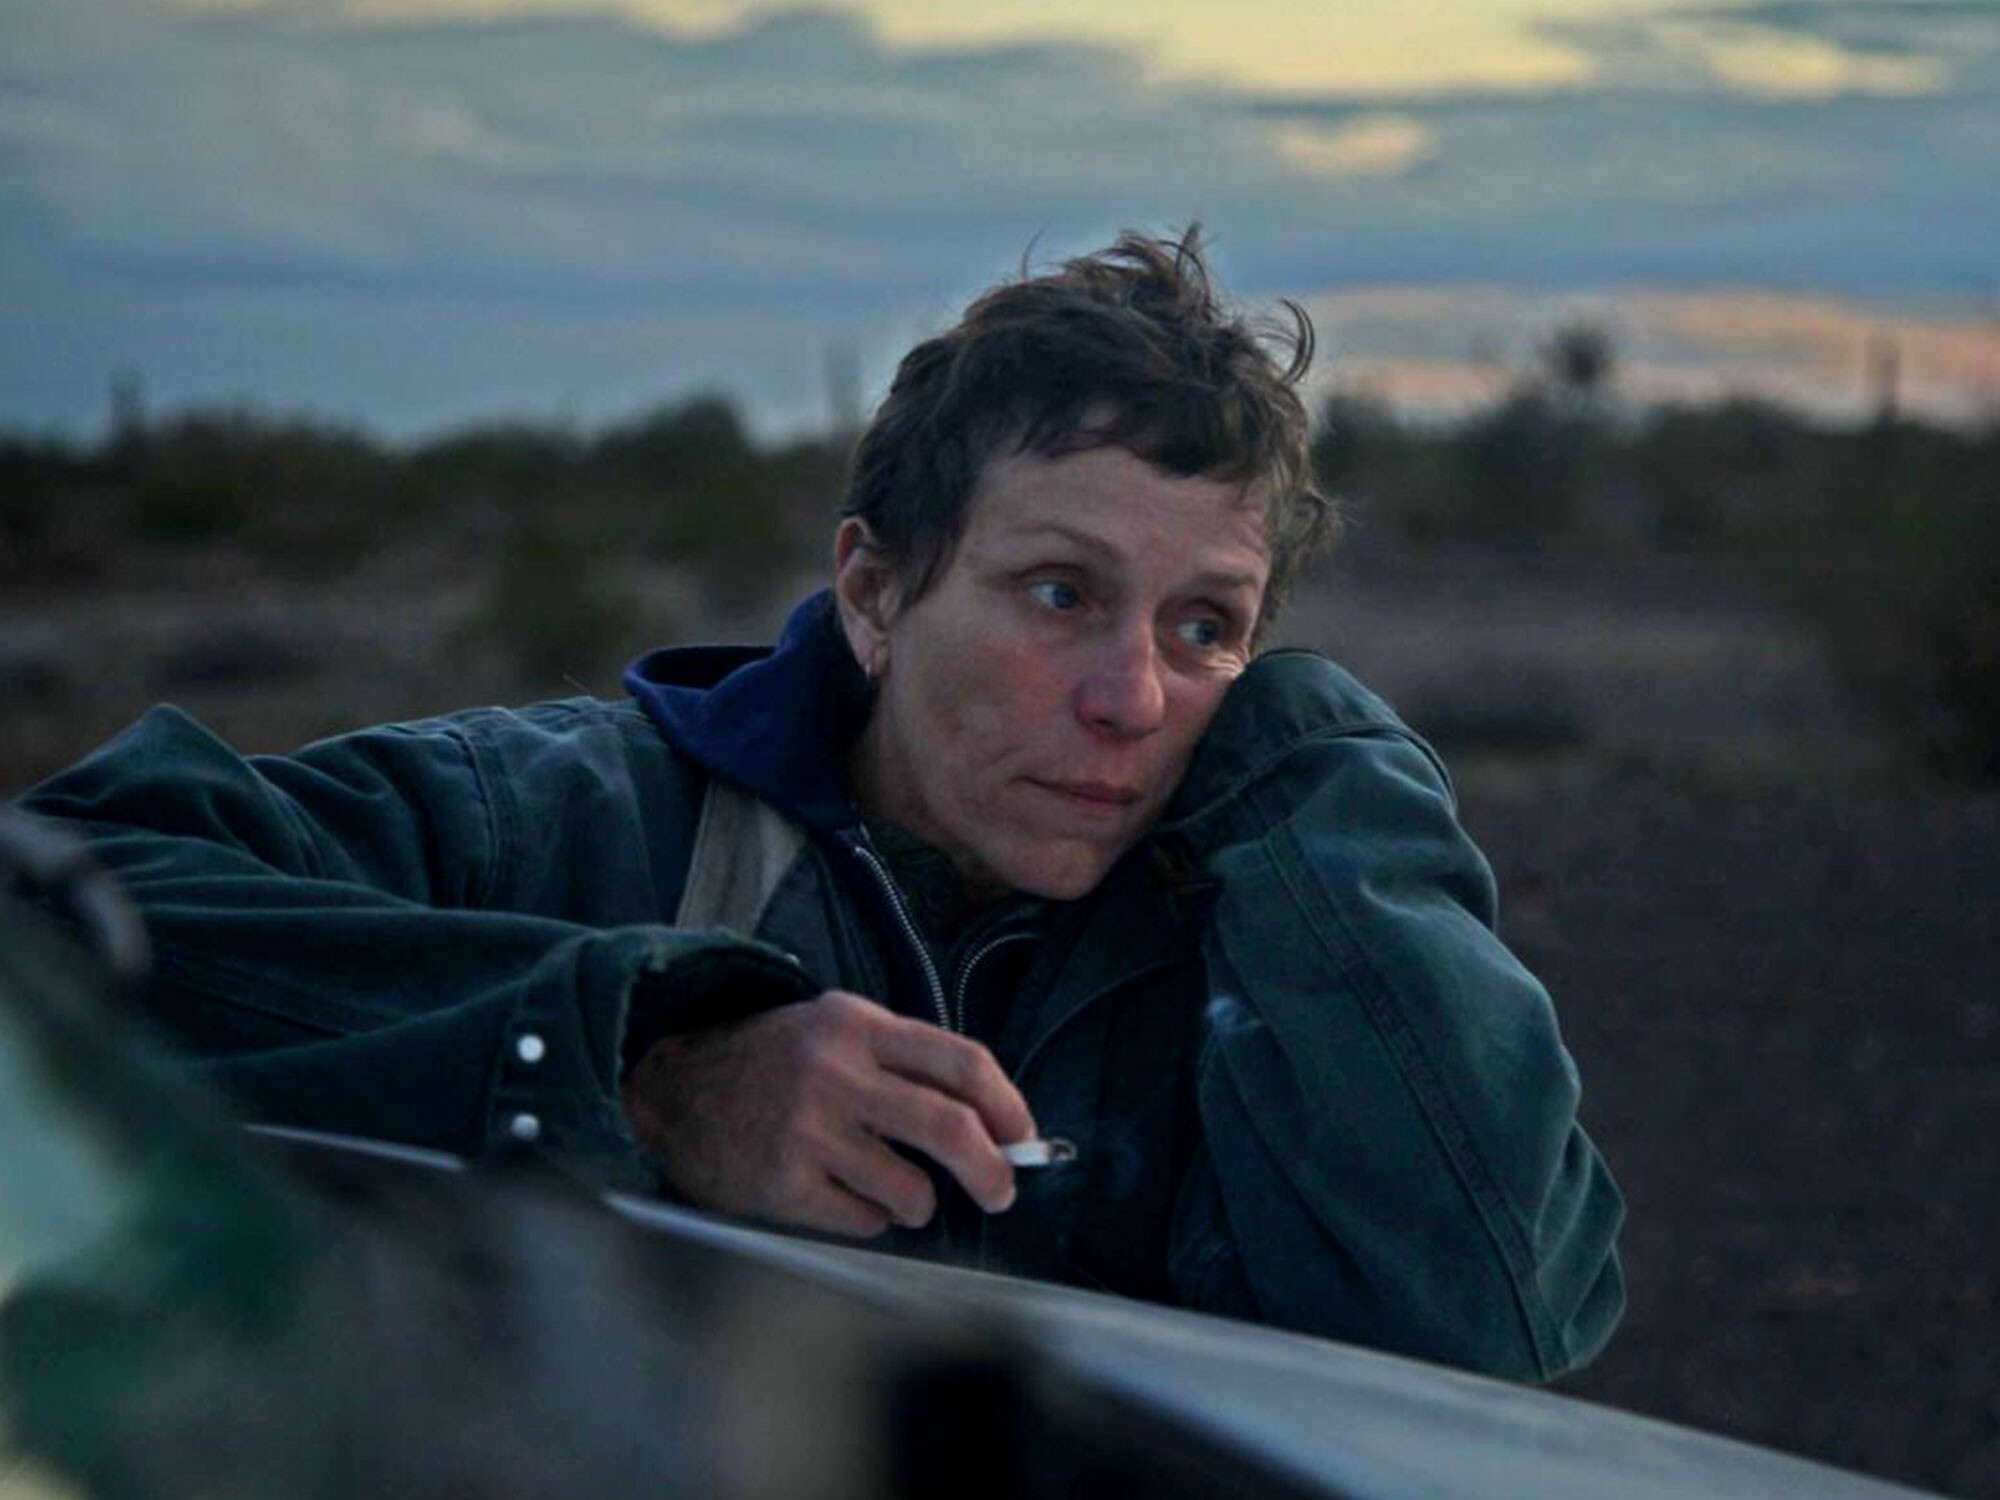 Frances McDormand is seen in a promo image for Nomadland, which was awarded the Golden Lion at the Venice film festival on Friday. Photo: Searchlight Pictures